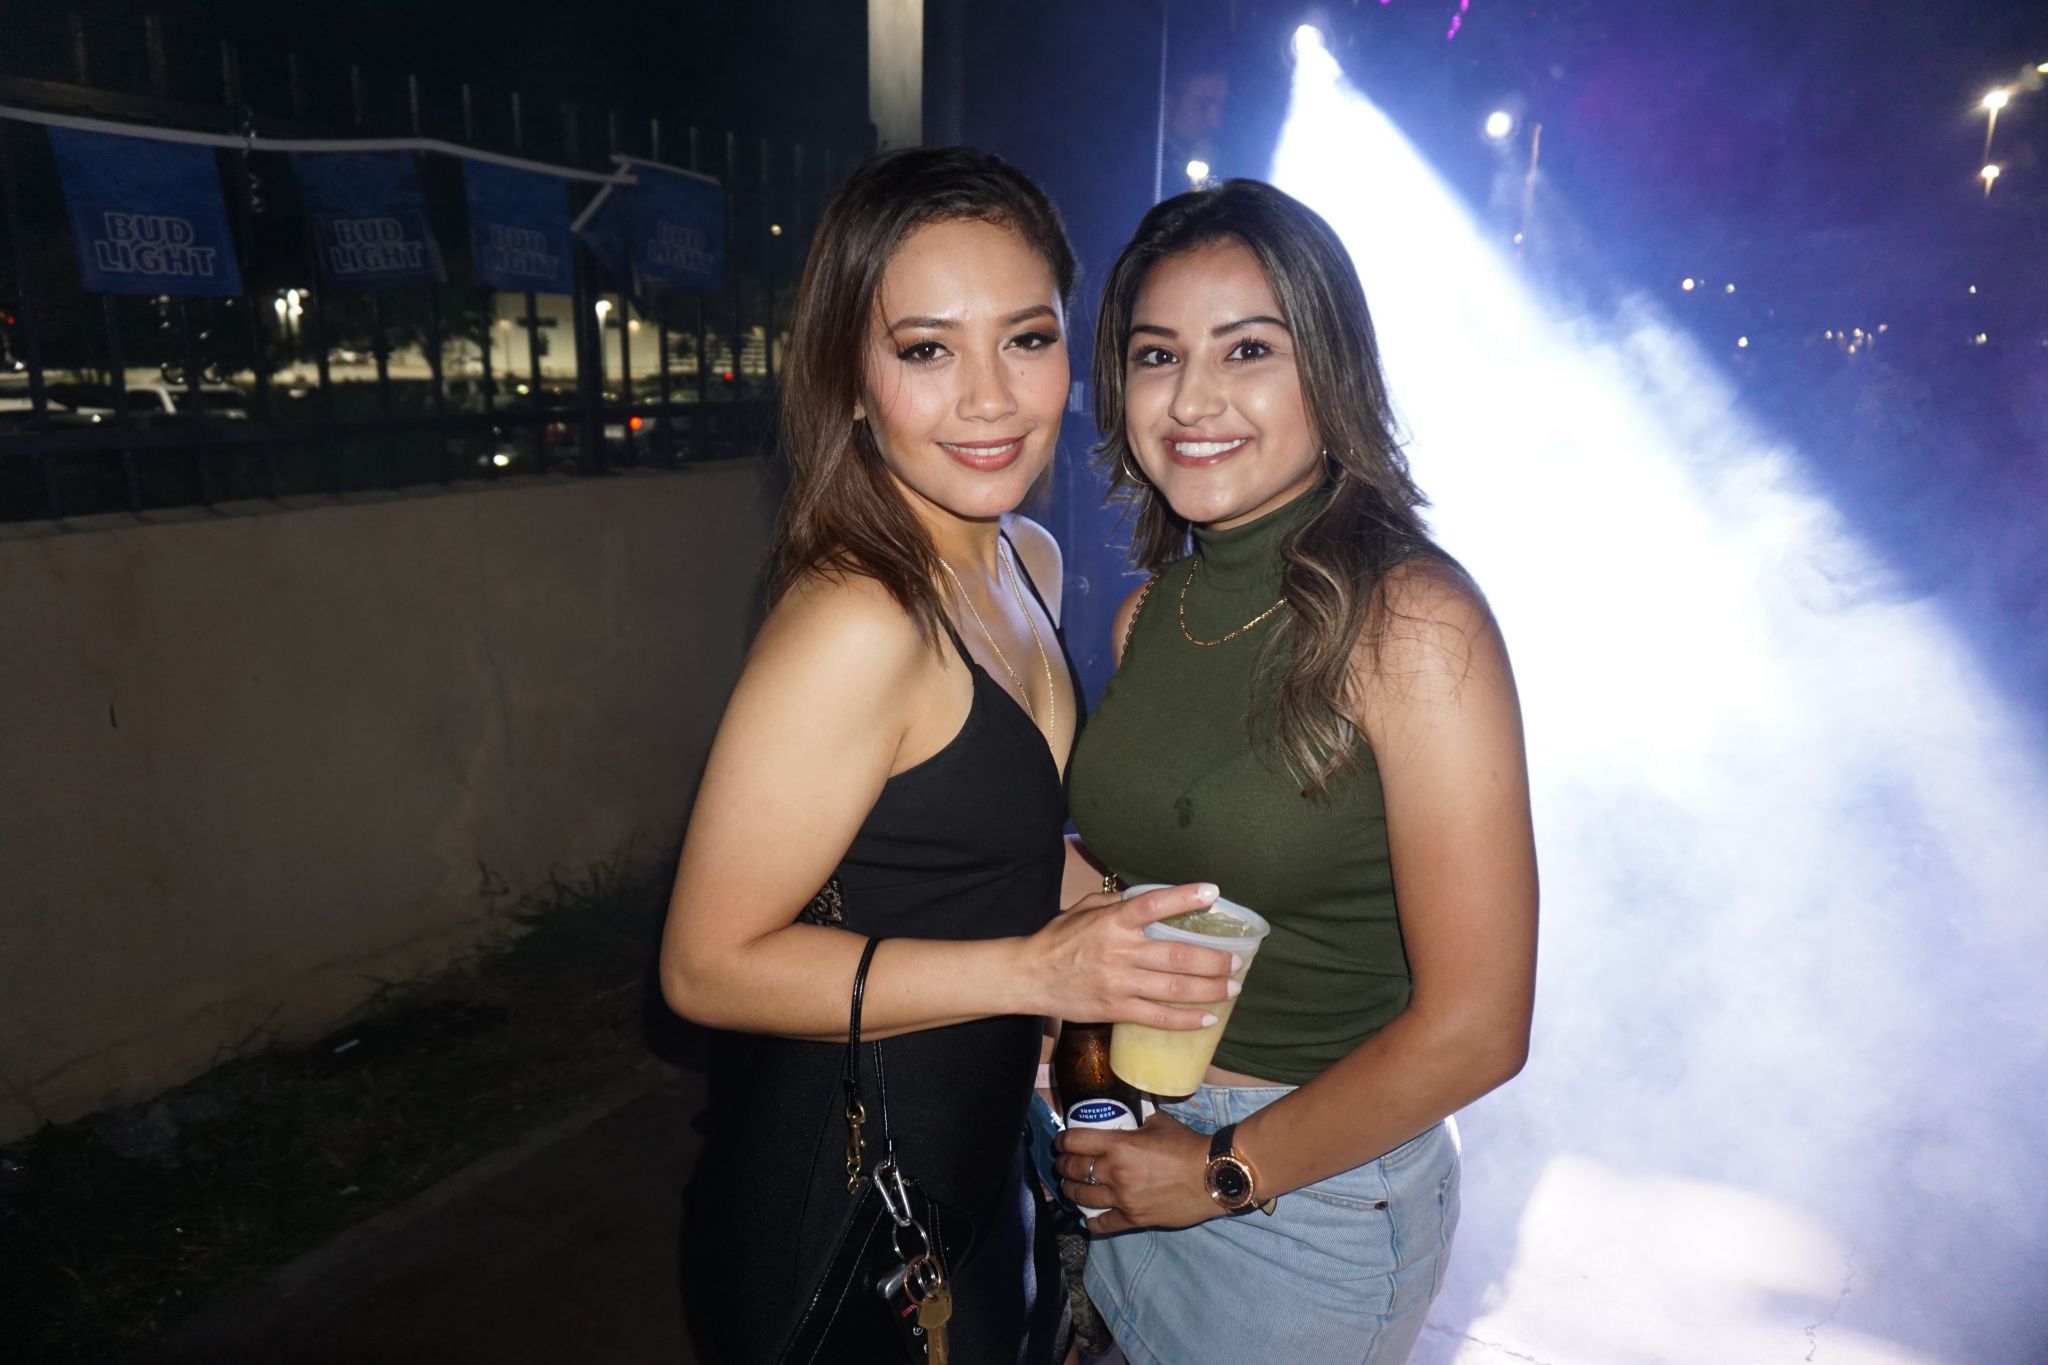 Out And About New Bars Make Their Debut In The Laredo Nightlife